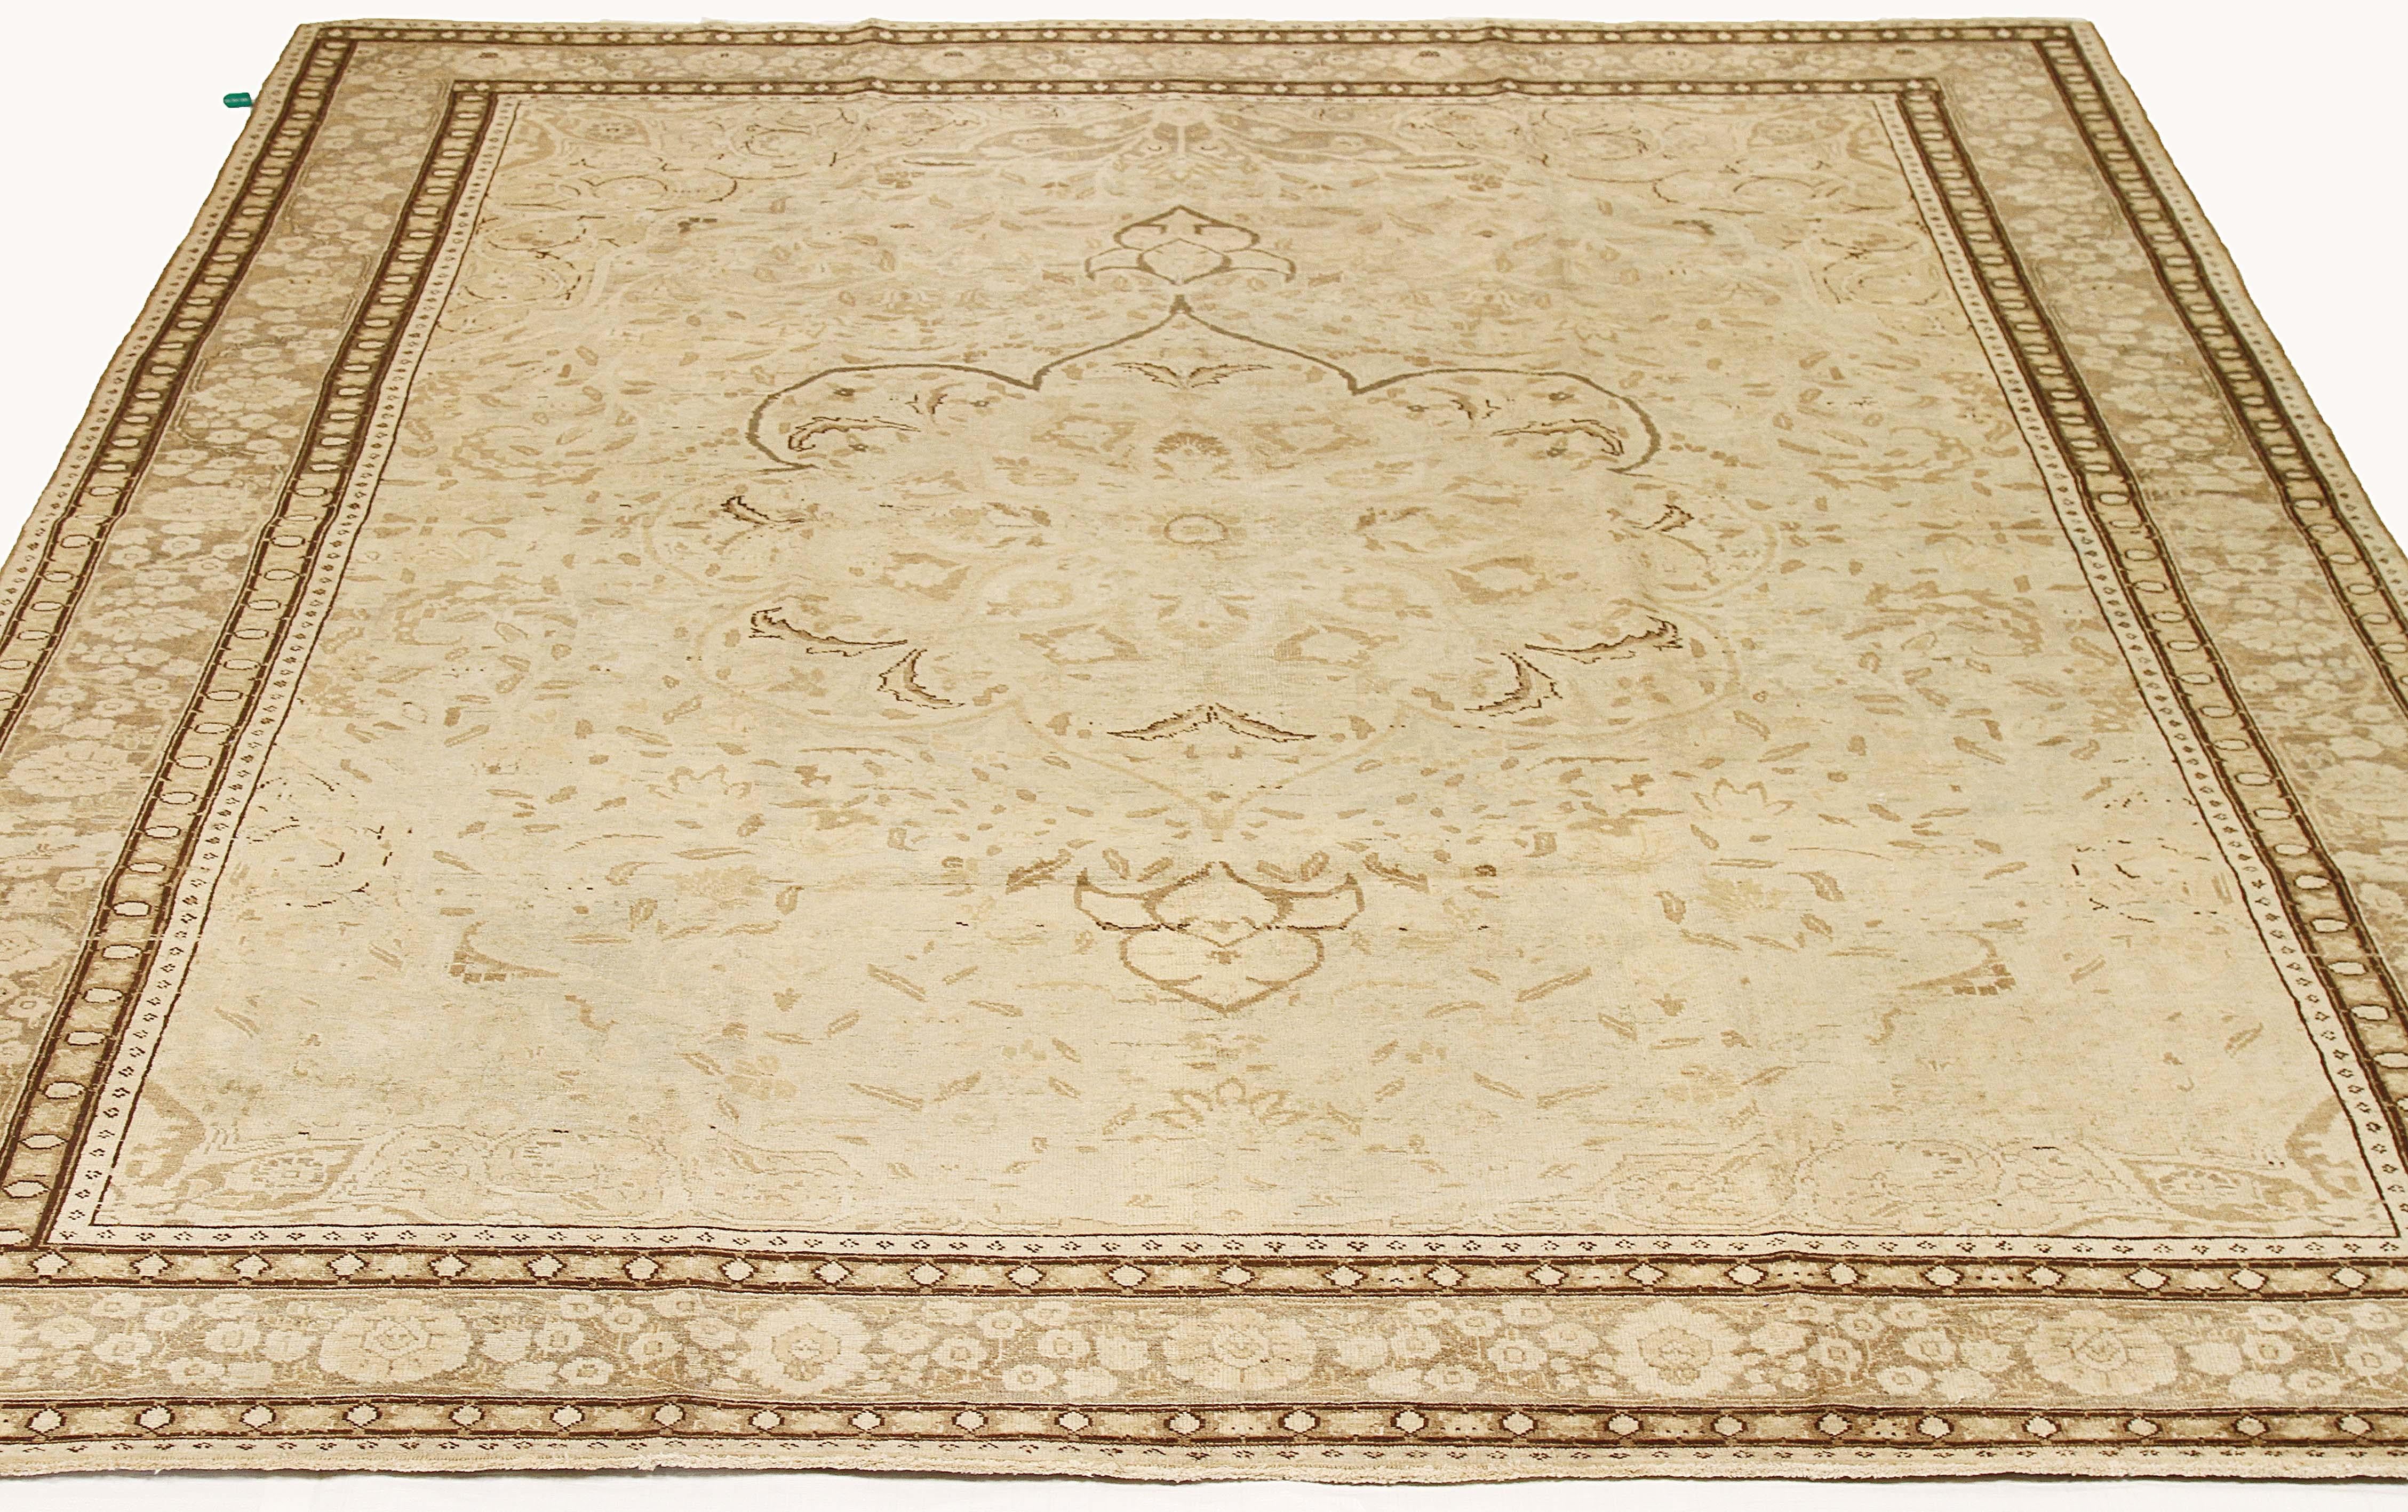 Antique Persian rug handwoven from the finest sheep’s wool and colored with all-natural vegetable dyes that are safe for humans and pets. It’s a traditional Tabriz weaving featuring brown and gray floral details over an ivory field. It’s a stunning